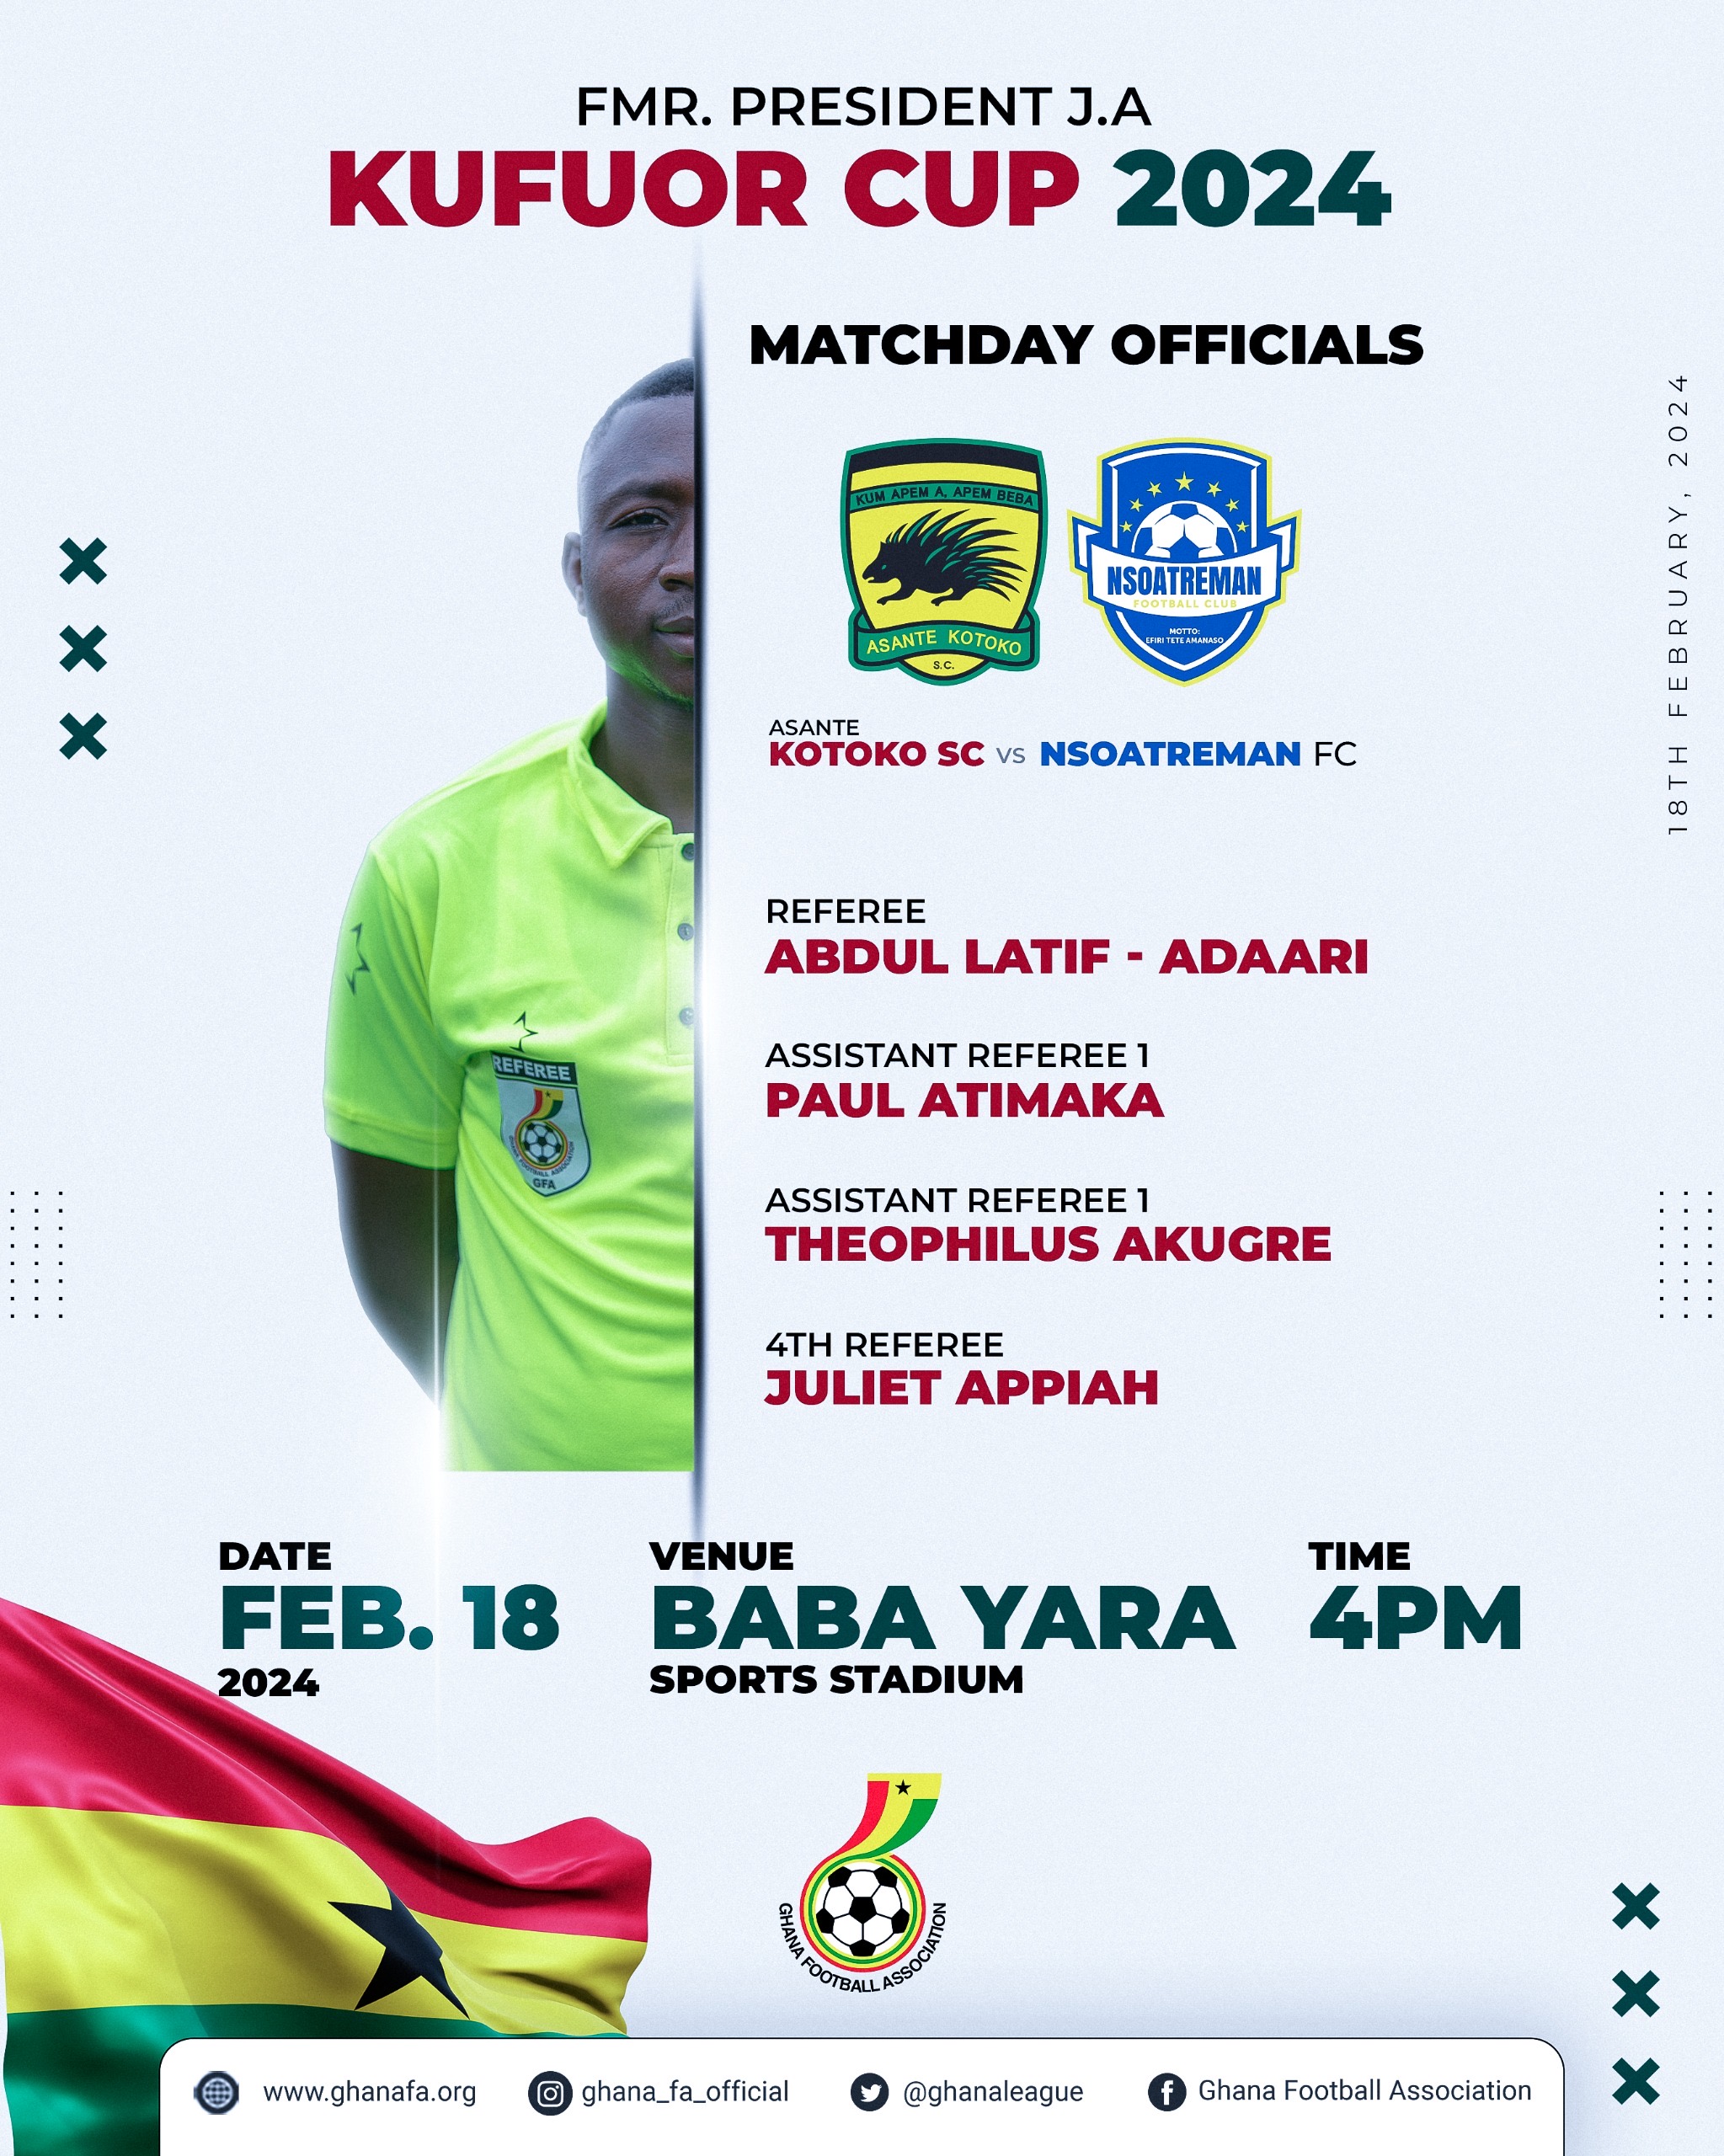 Match Officials for JA Kufour Cup match announced